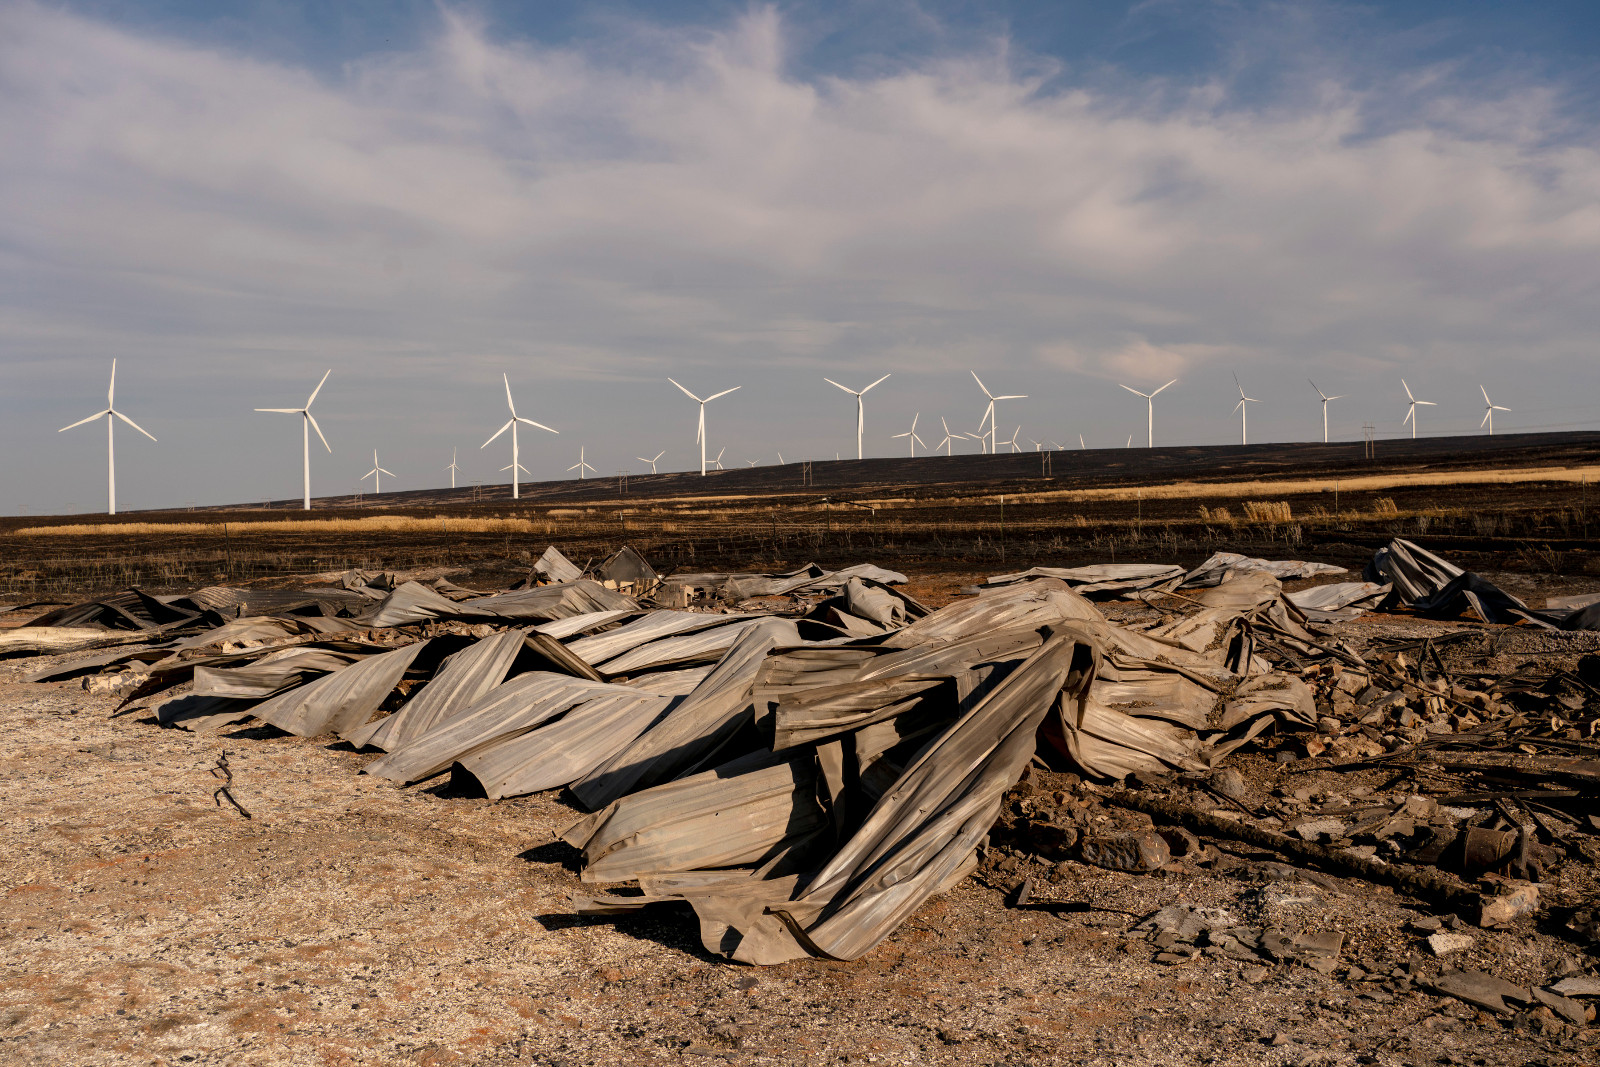 A photo shows rubble from a fire and wind turbines in the distance